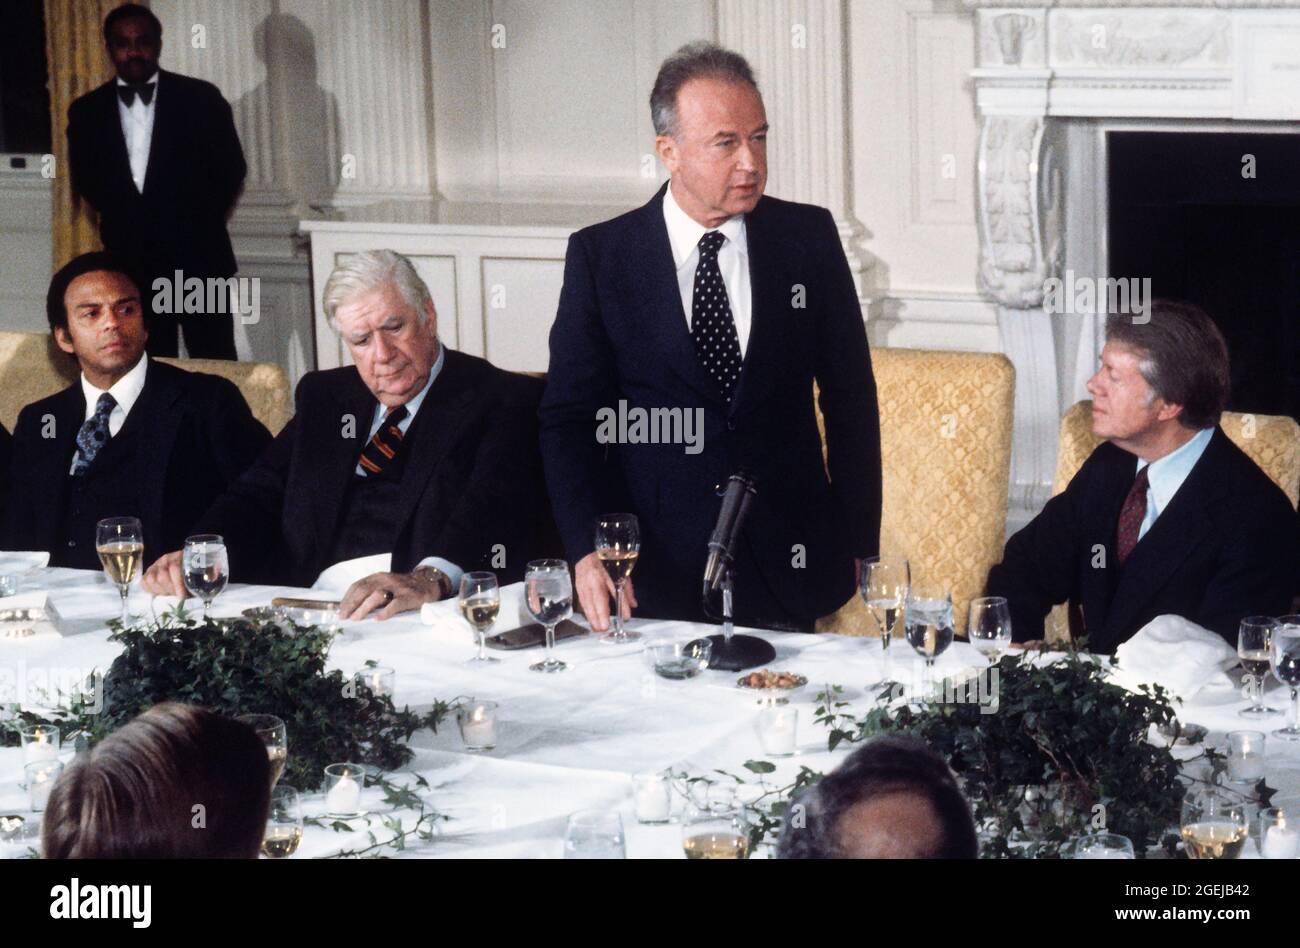 Prime Minister Yitzhak Rabin of Israel, right center, offers remarks at a working dinner in his honor hosted by United States President Jimmy Carter, right, in the State Dining Room of the White House in Washington, DC on  Monday, March 7, 1977.  Looking on is Speaker of the US House of Representatives Tip O’Neill (Democrat of Massachusetts), left center, and US Ambassador to the United Nations Andrew Young.Credit: Benjamin E. 'Gene' Forte / CNP /MediaPunch Stock Photo